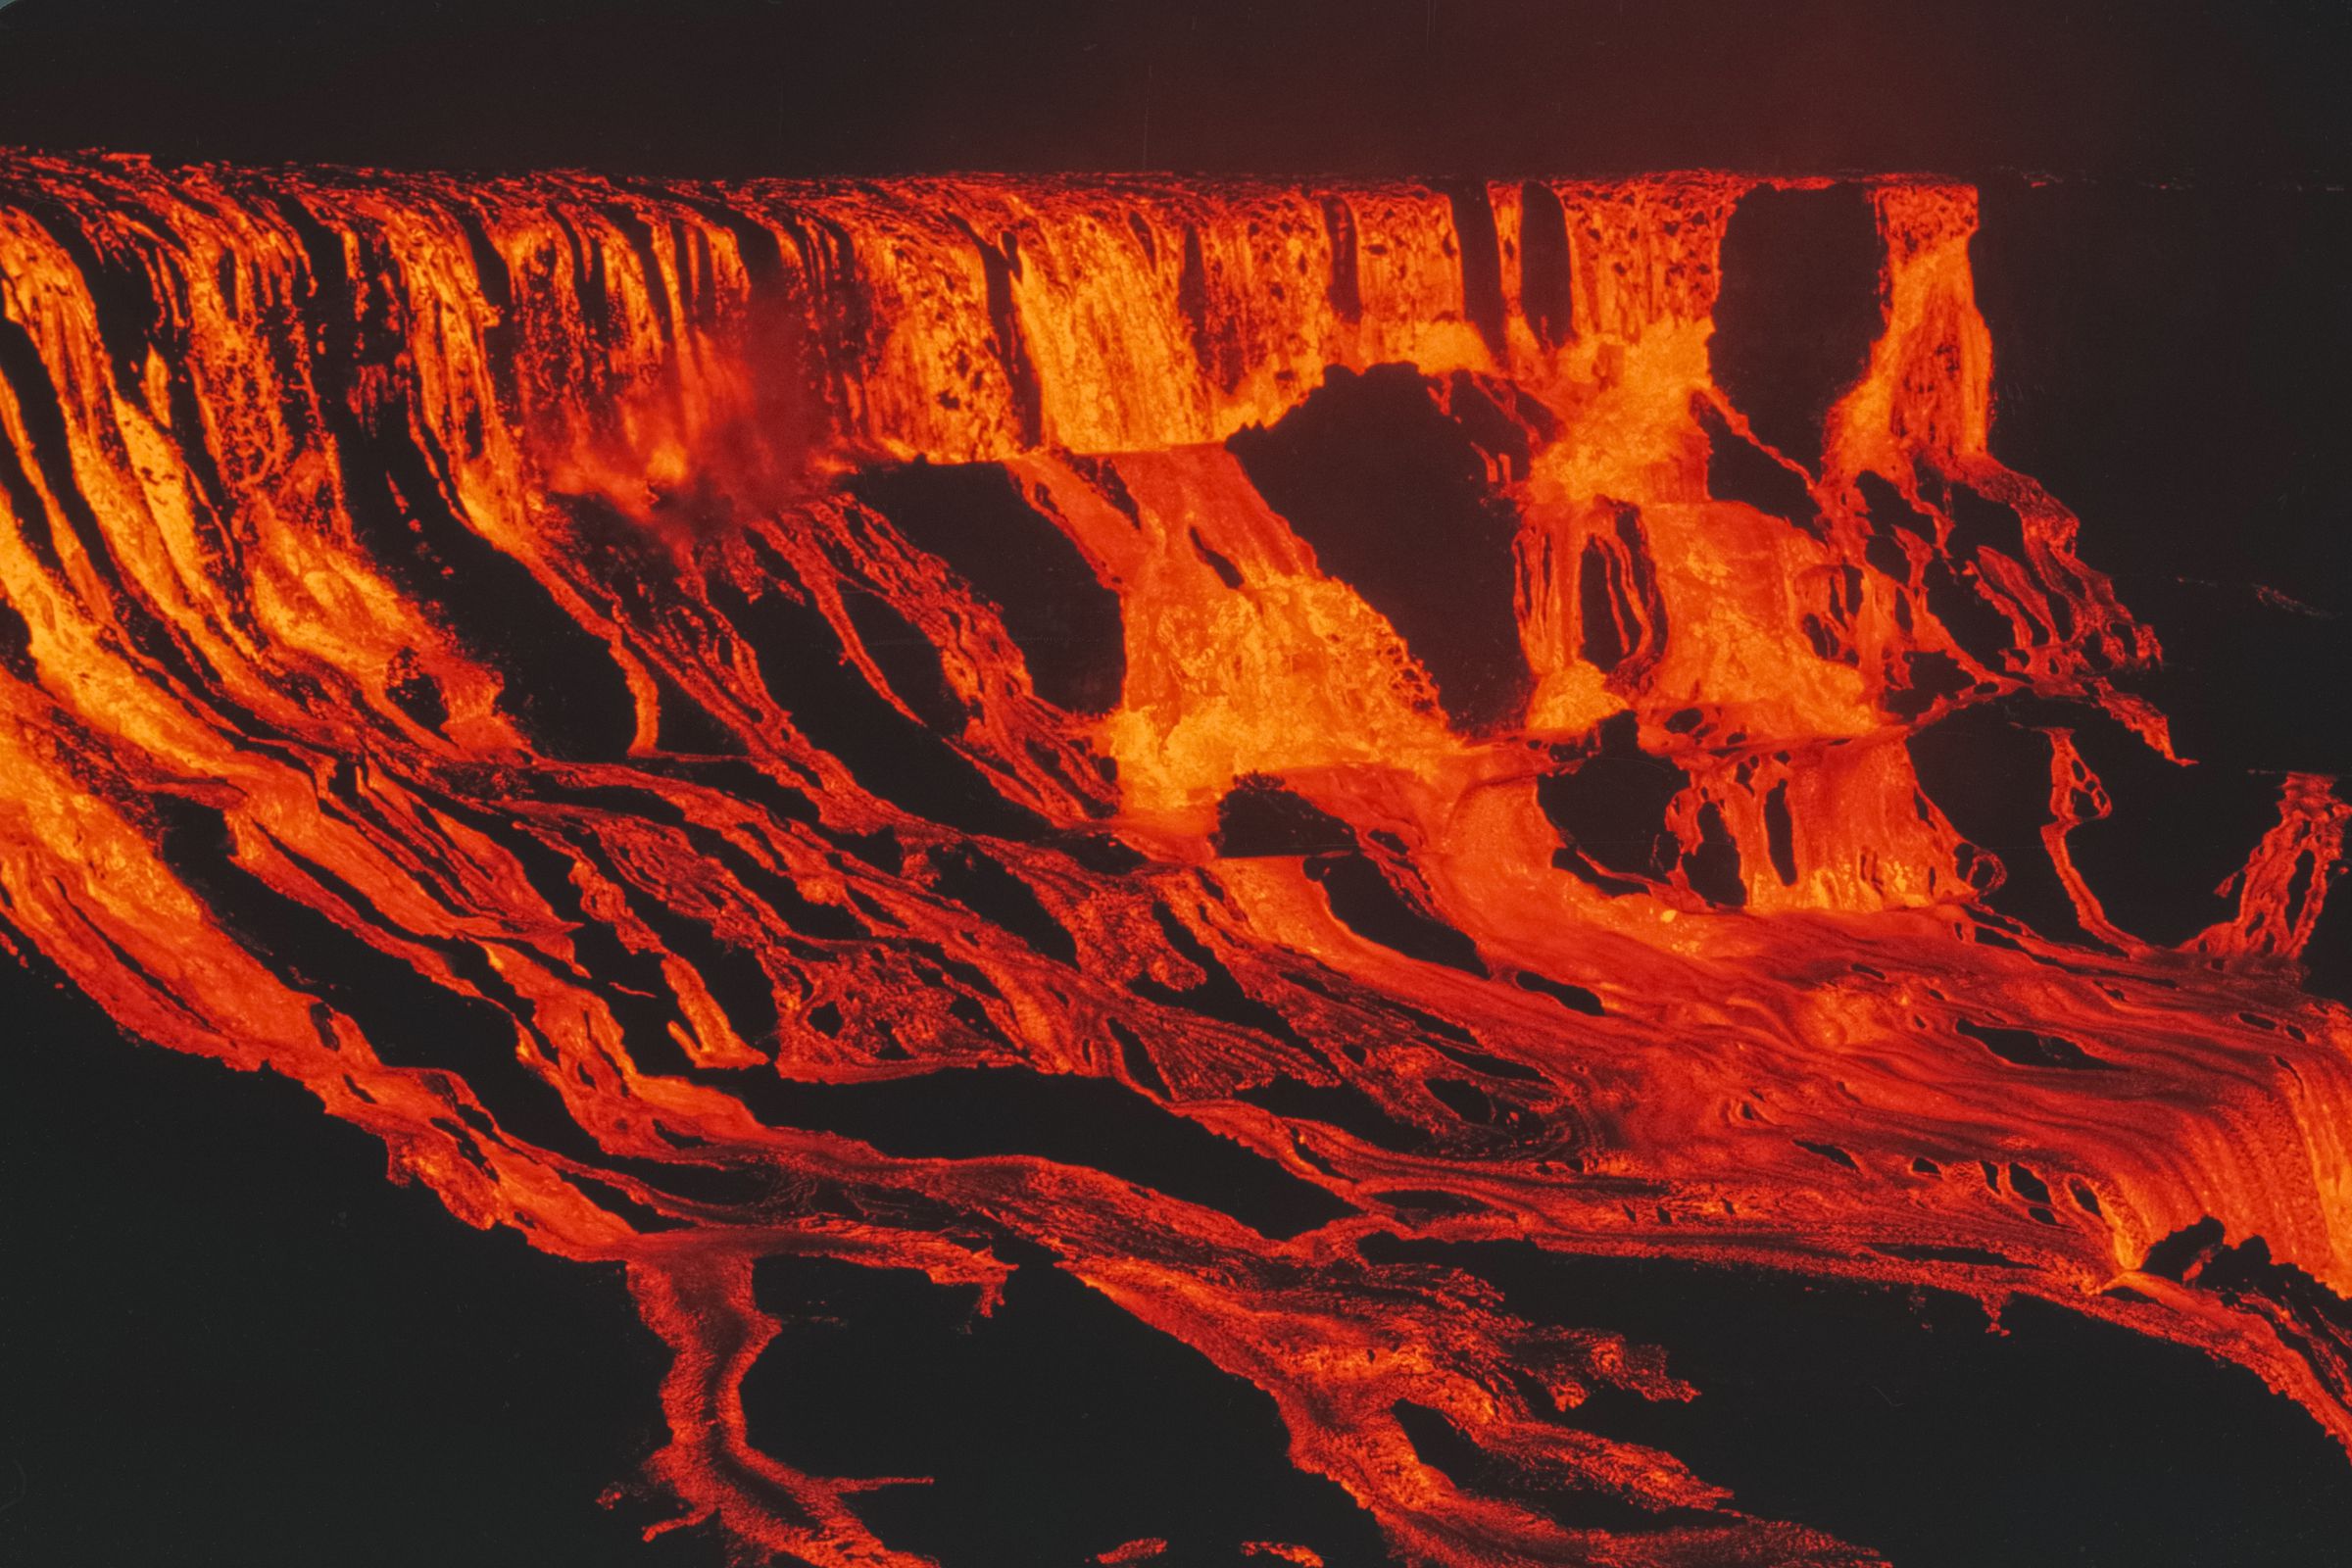 August 5, 1969: Mauna Ulu in Hawaii sent lava flowing into ‘Alae crater. 